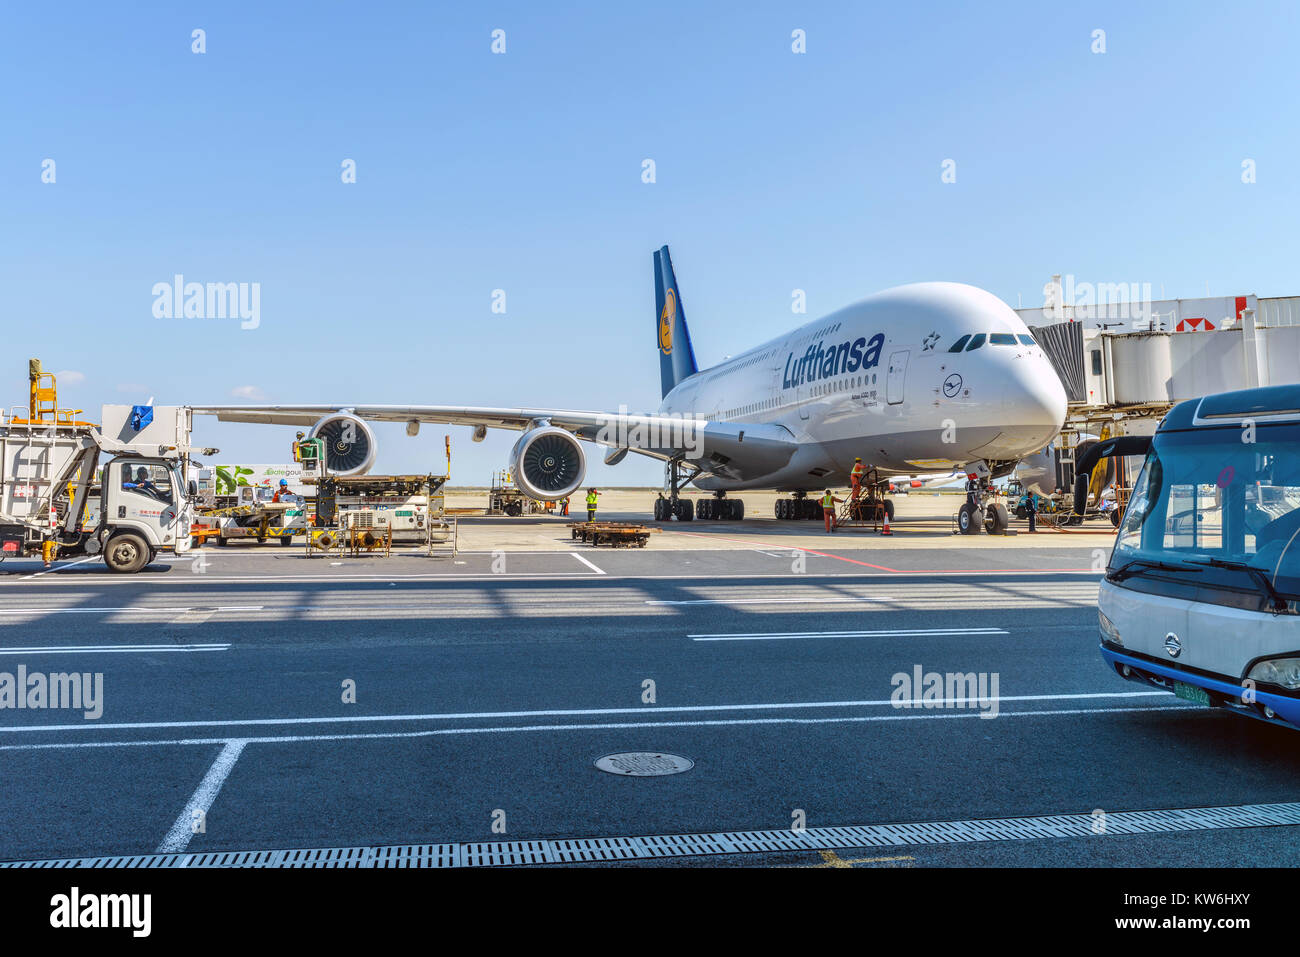 Get Ready to Fly - At Shanghai Pudong International Airport, the technicians are busy preparing a Lufthansa Airline's Airbus A380-800 for another fly. Stock Photo